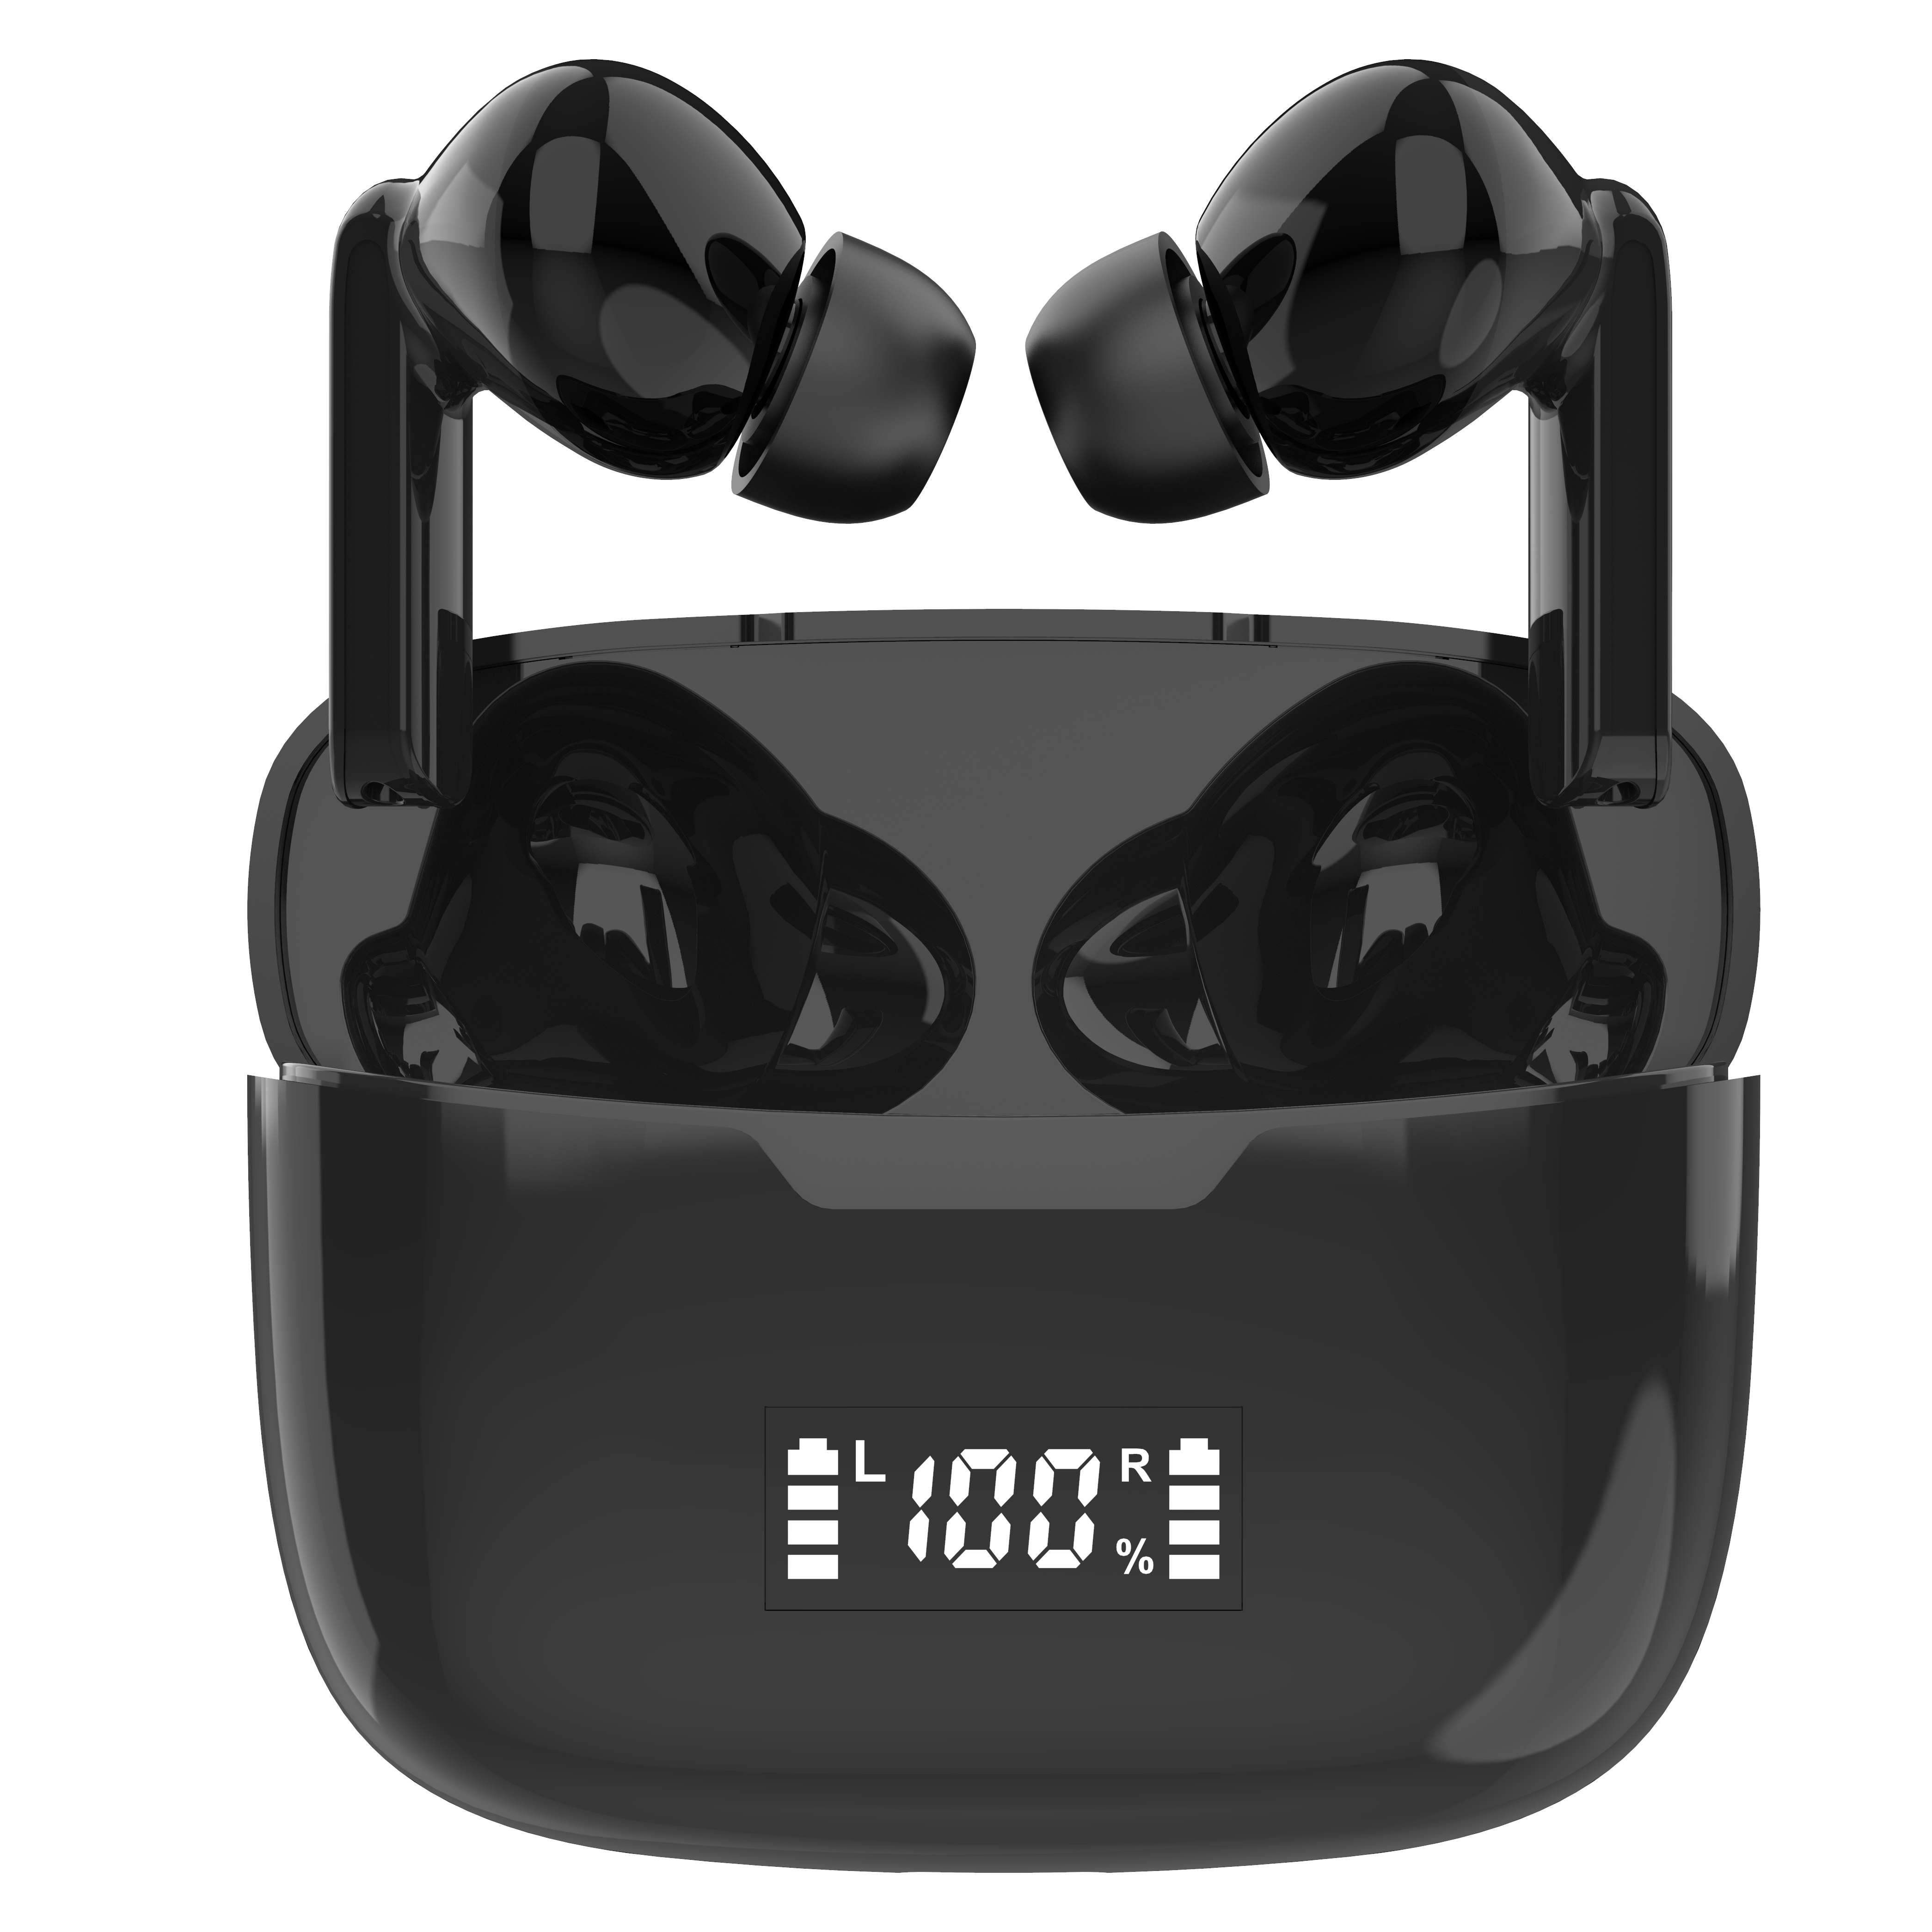 Big Discount Completely Wireless Bluetooth Earbuds - TWS Bluetooth Stereo Earbuds In Portable Design | Wellyp – Wellyp